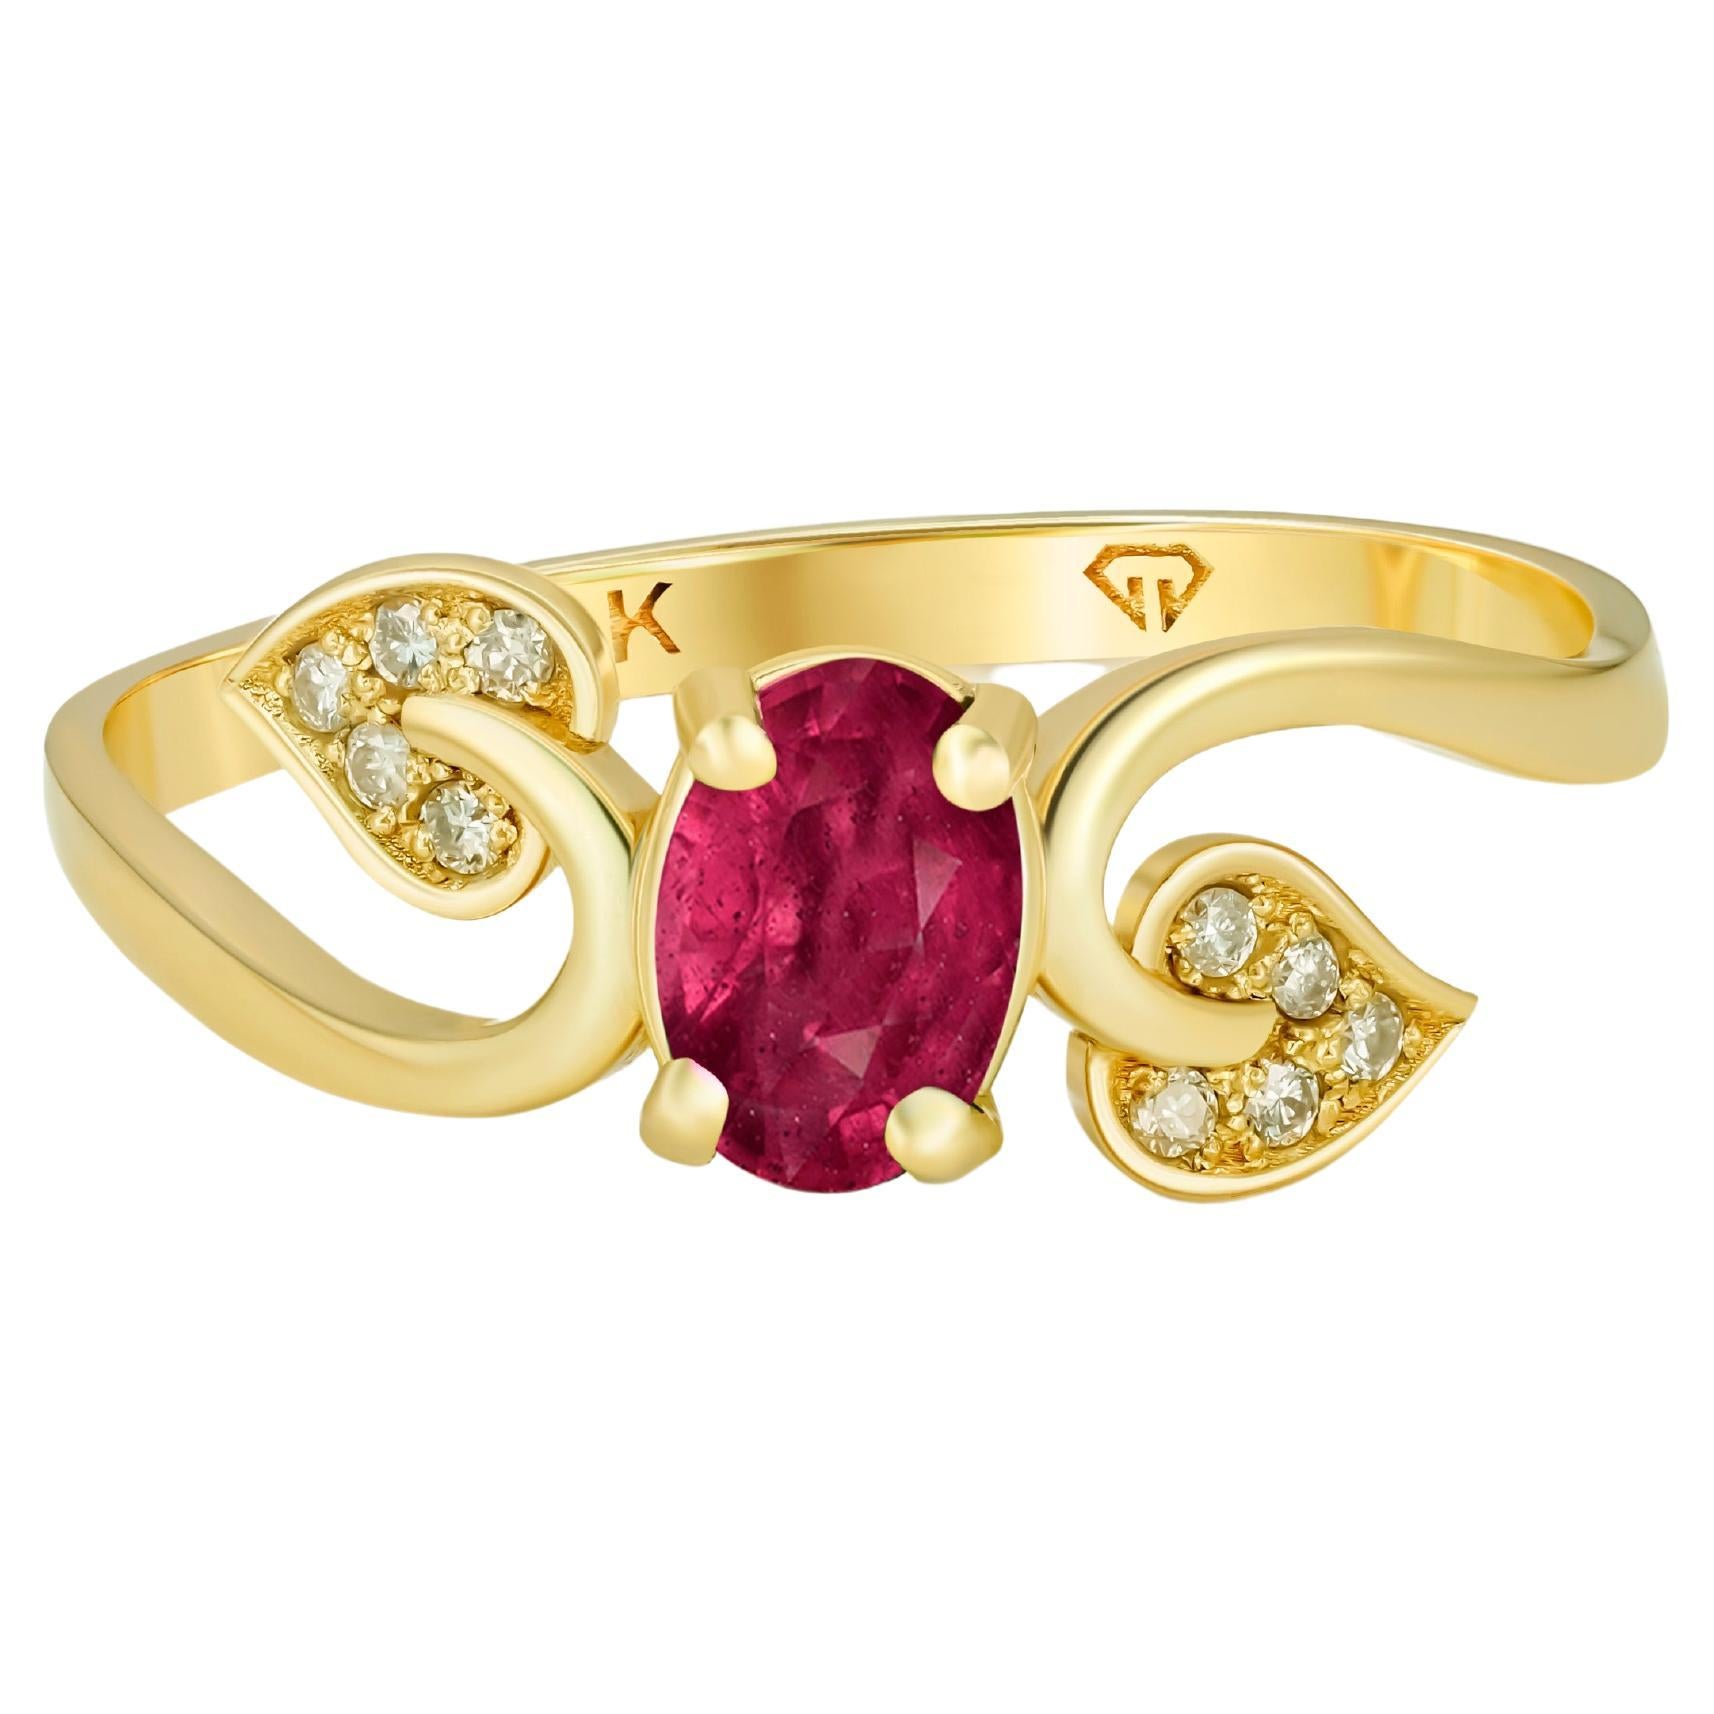 Ruby Engagement Ring, Ruby Vintage Ring, Genuine Ruby 14k Gold Ring